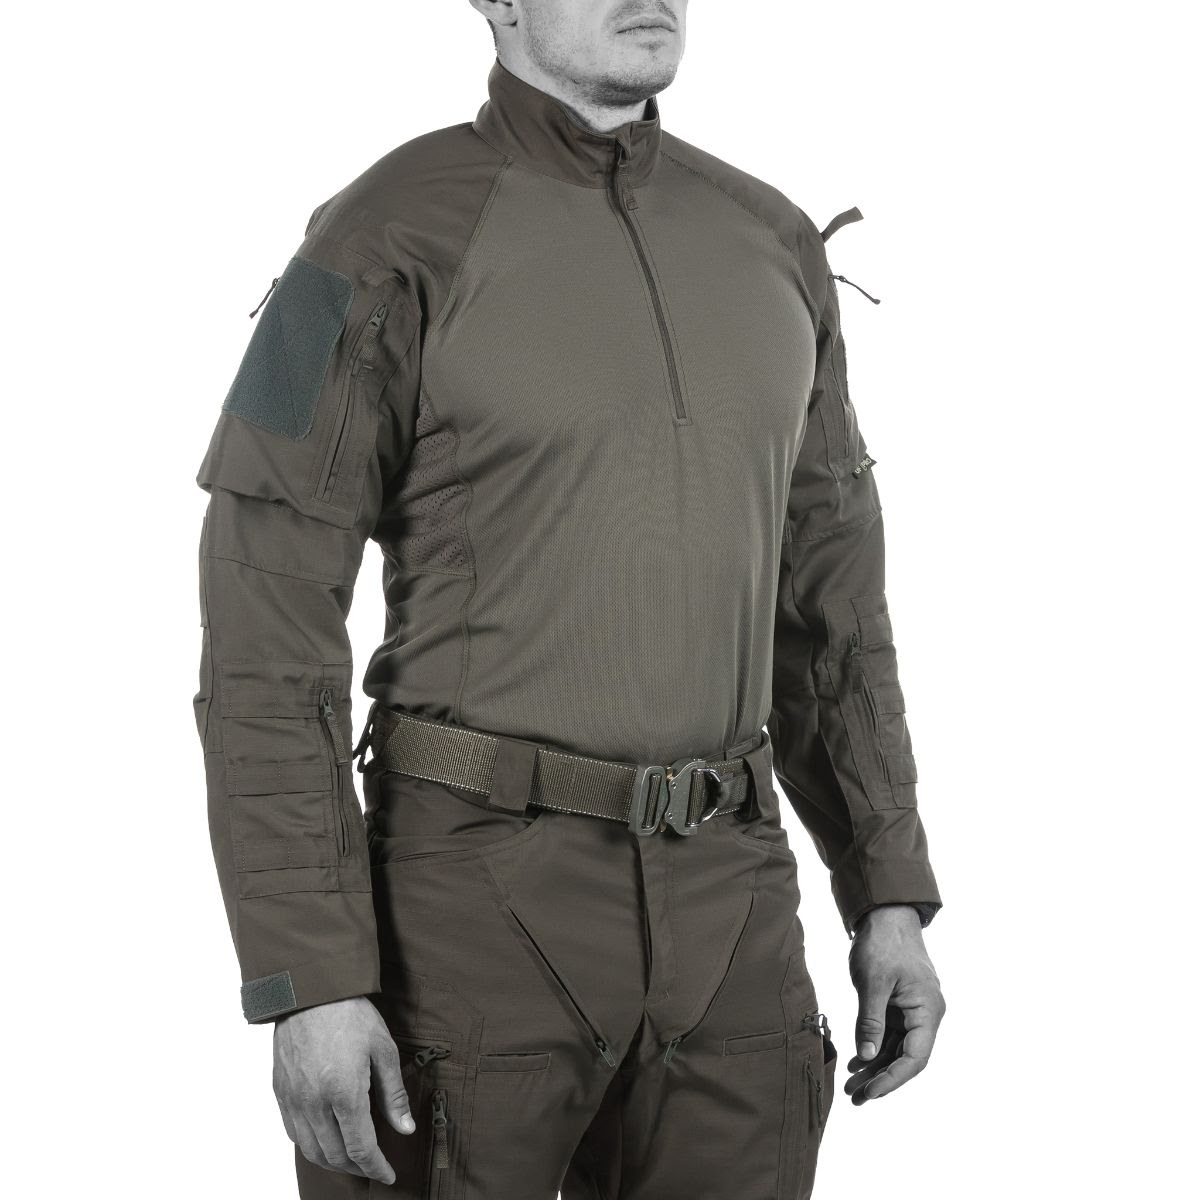 Anarchy Outdoors Offers UF Pro Tactical Clothing to U.S. Market ...